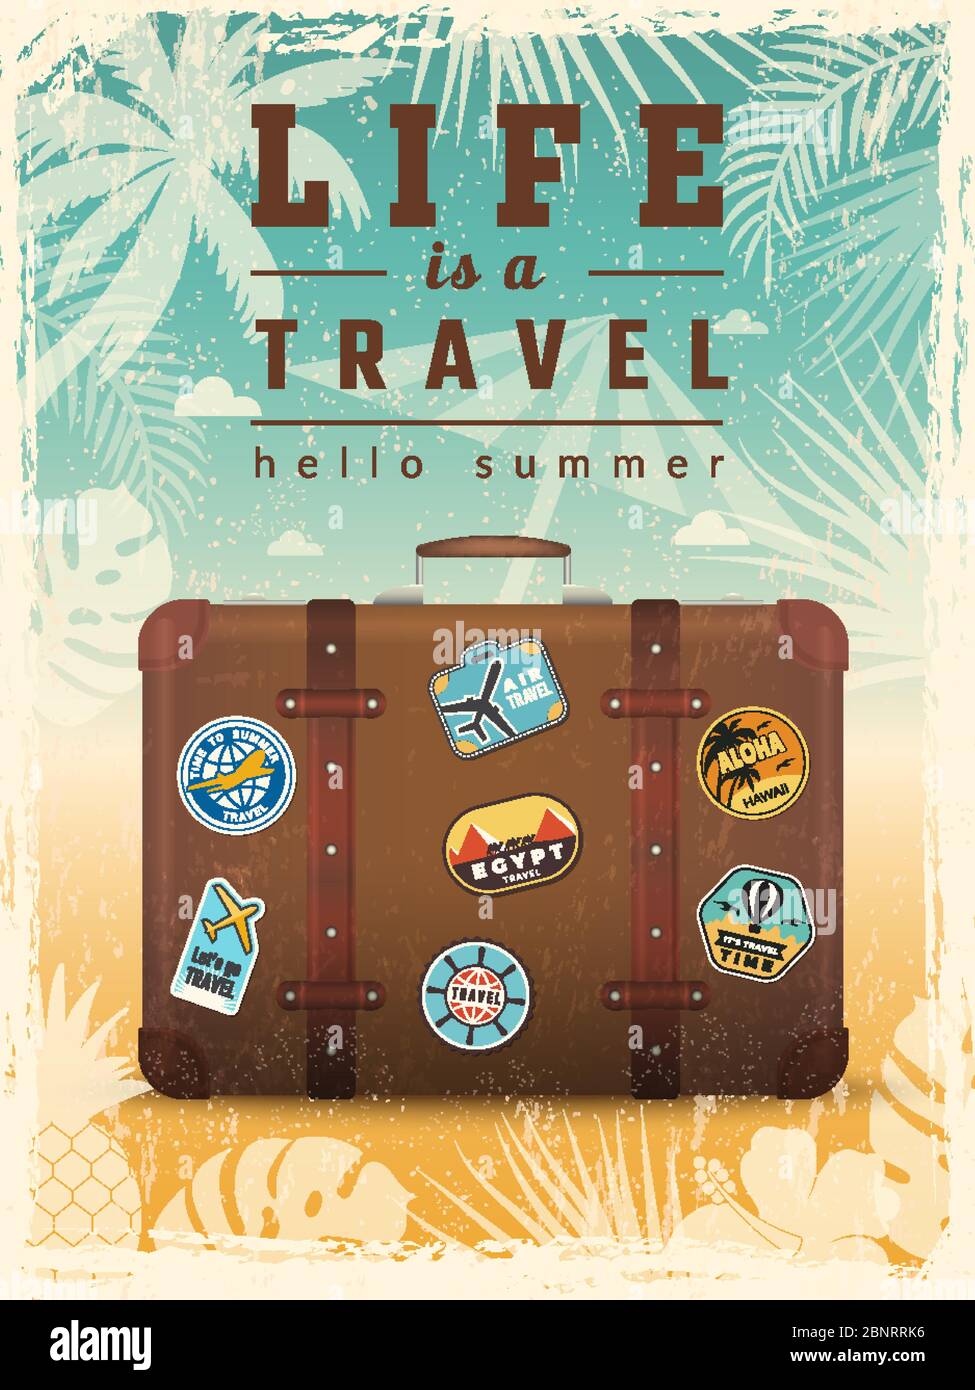 Travel retro poster. Summer vacation placard with travel vector signs Stock Vector